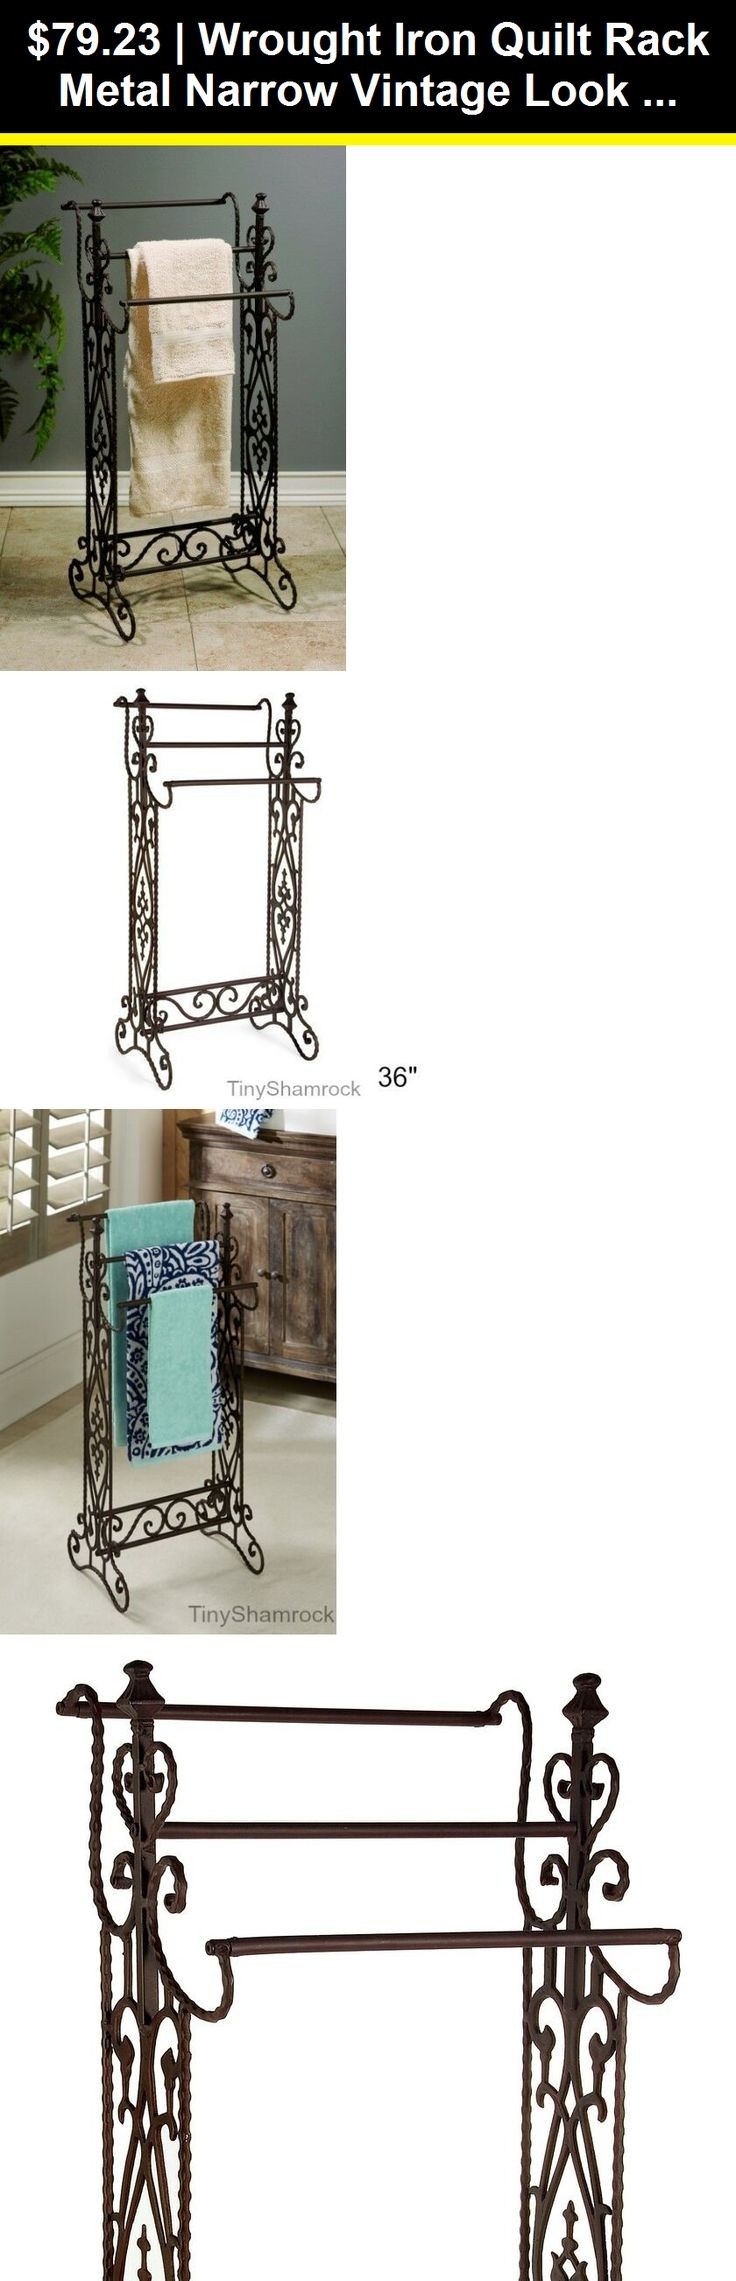 Quilt hangers and stands 83959 wrought iron quilt rack